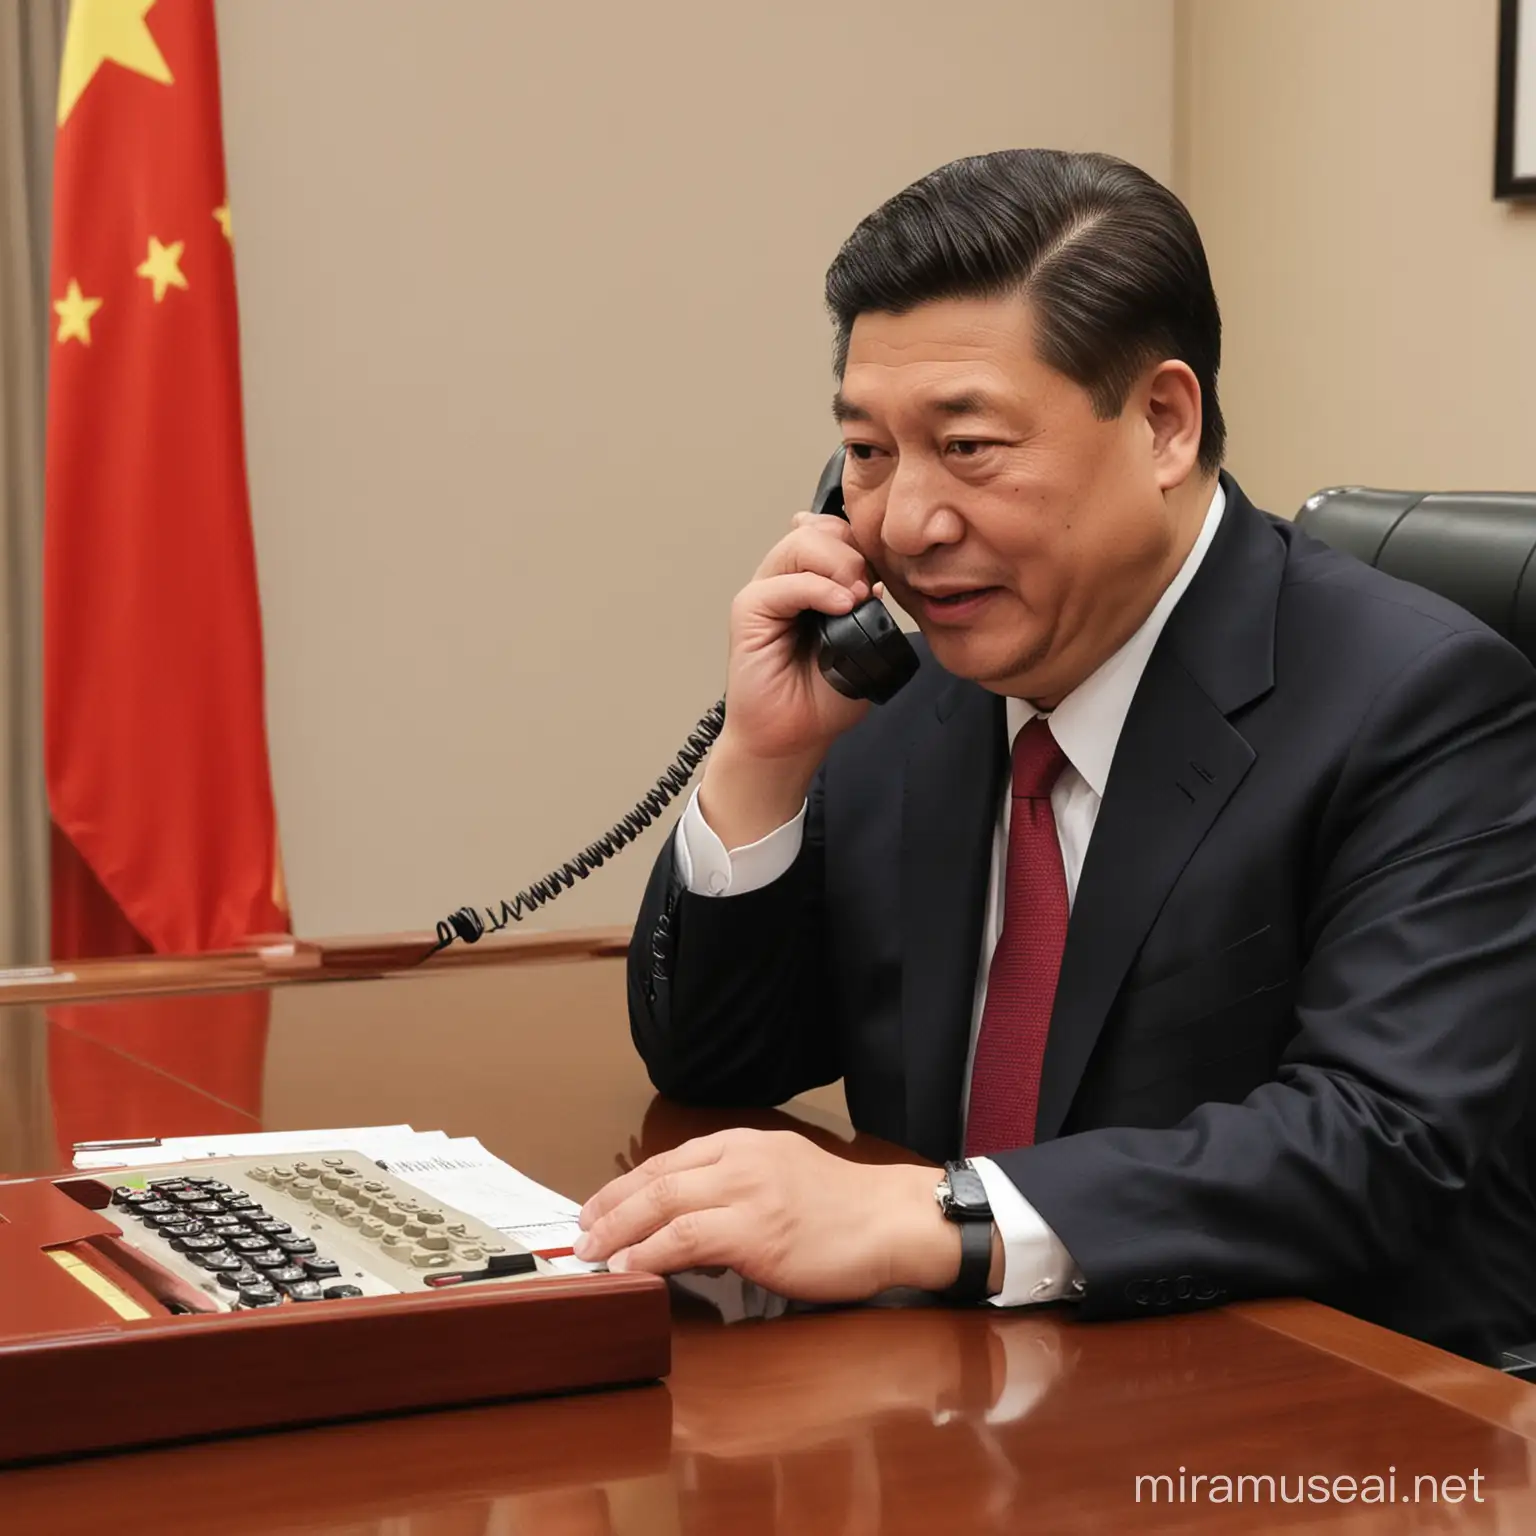 Chinese President Xi Jinping Making a Diplomatic Phone Call from His Office